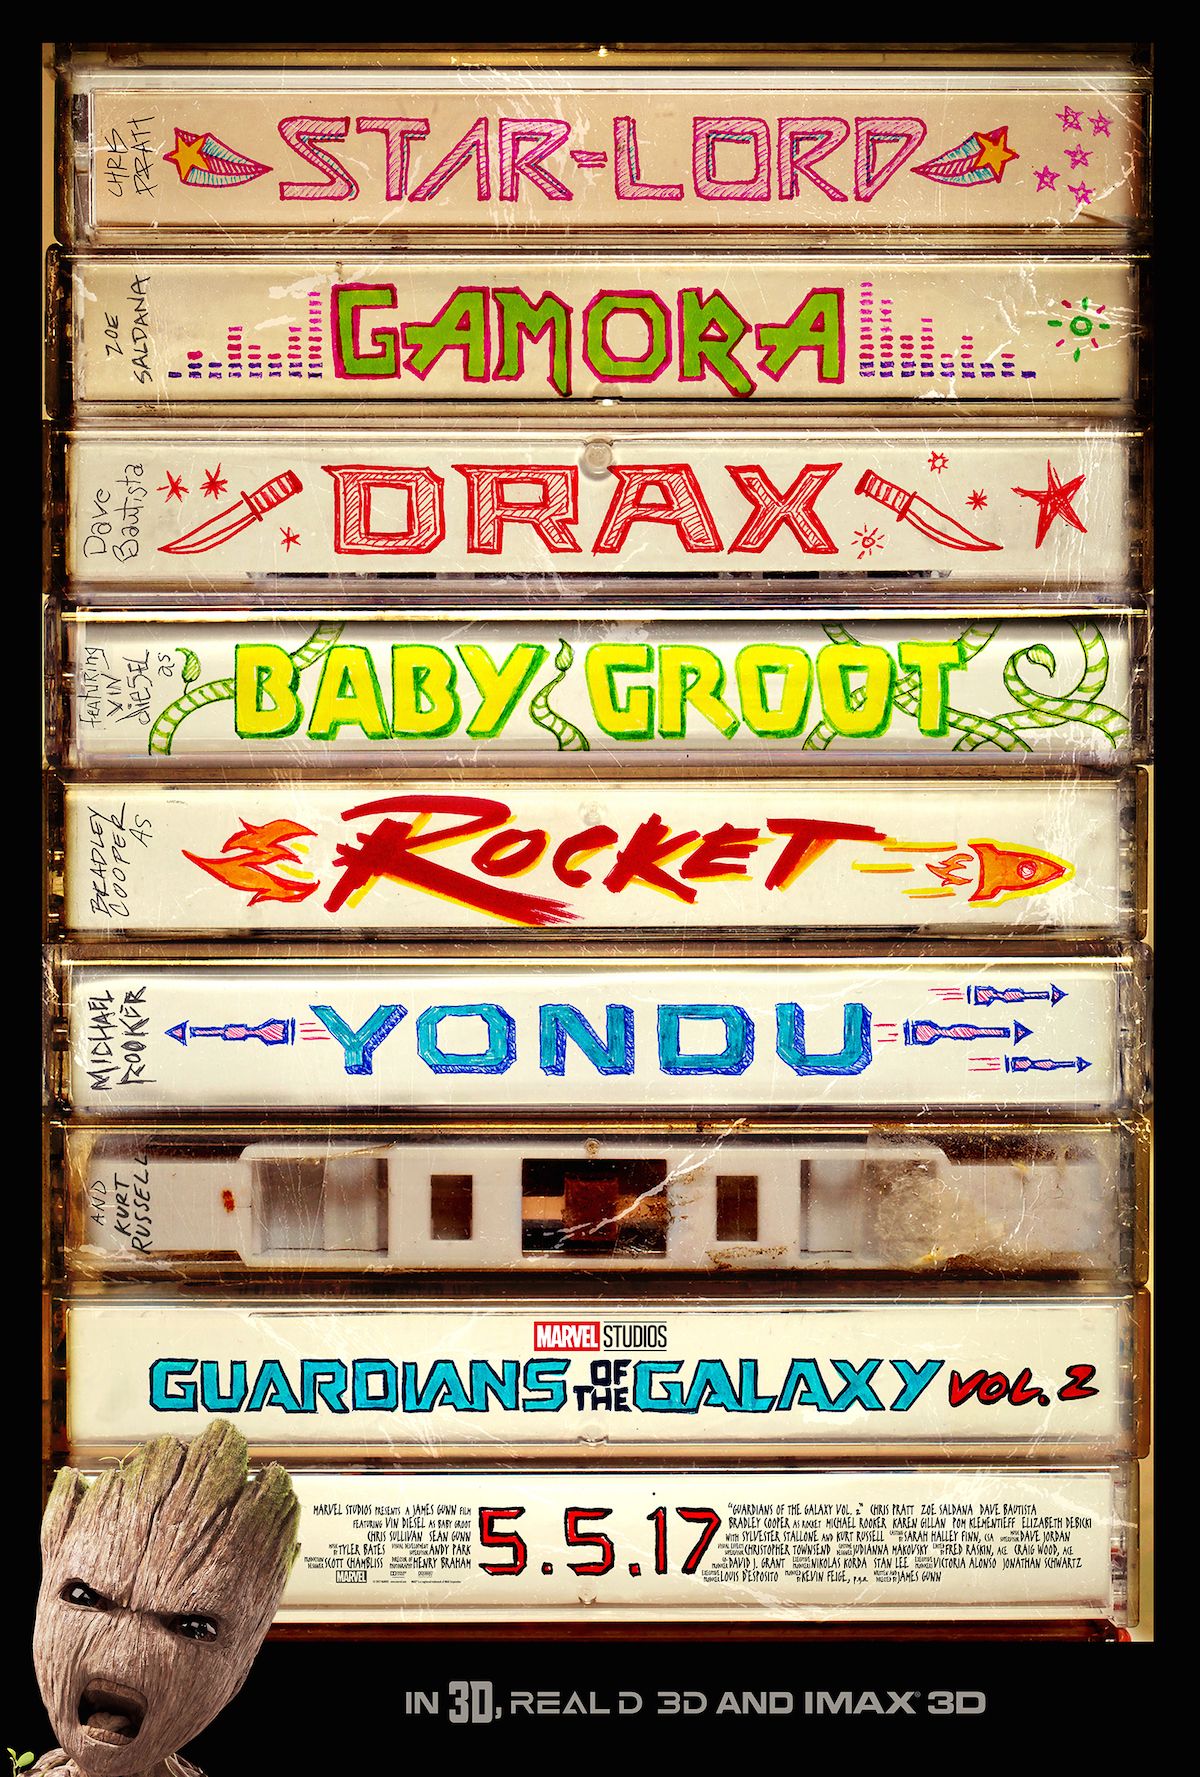 Guardians of the Galaxy 2 mix tape poster